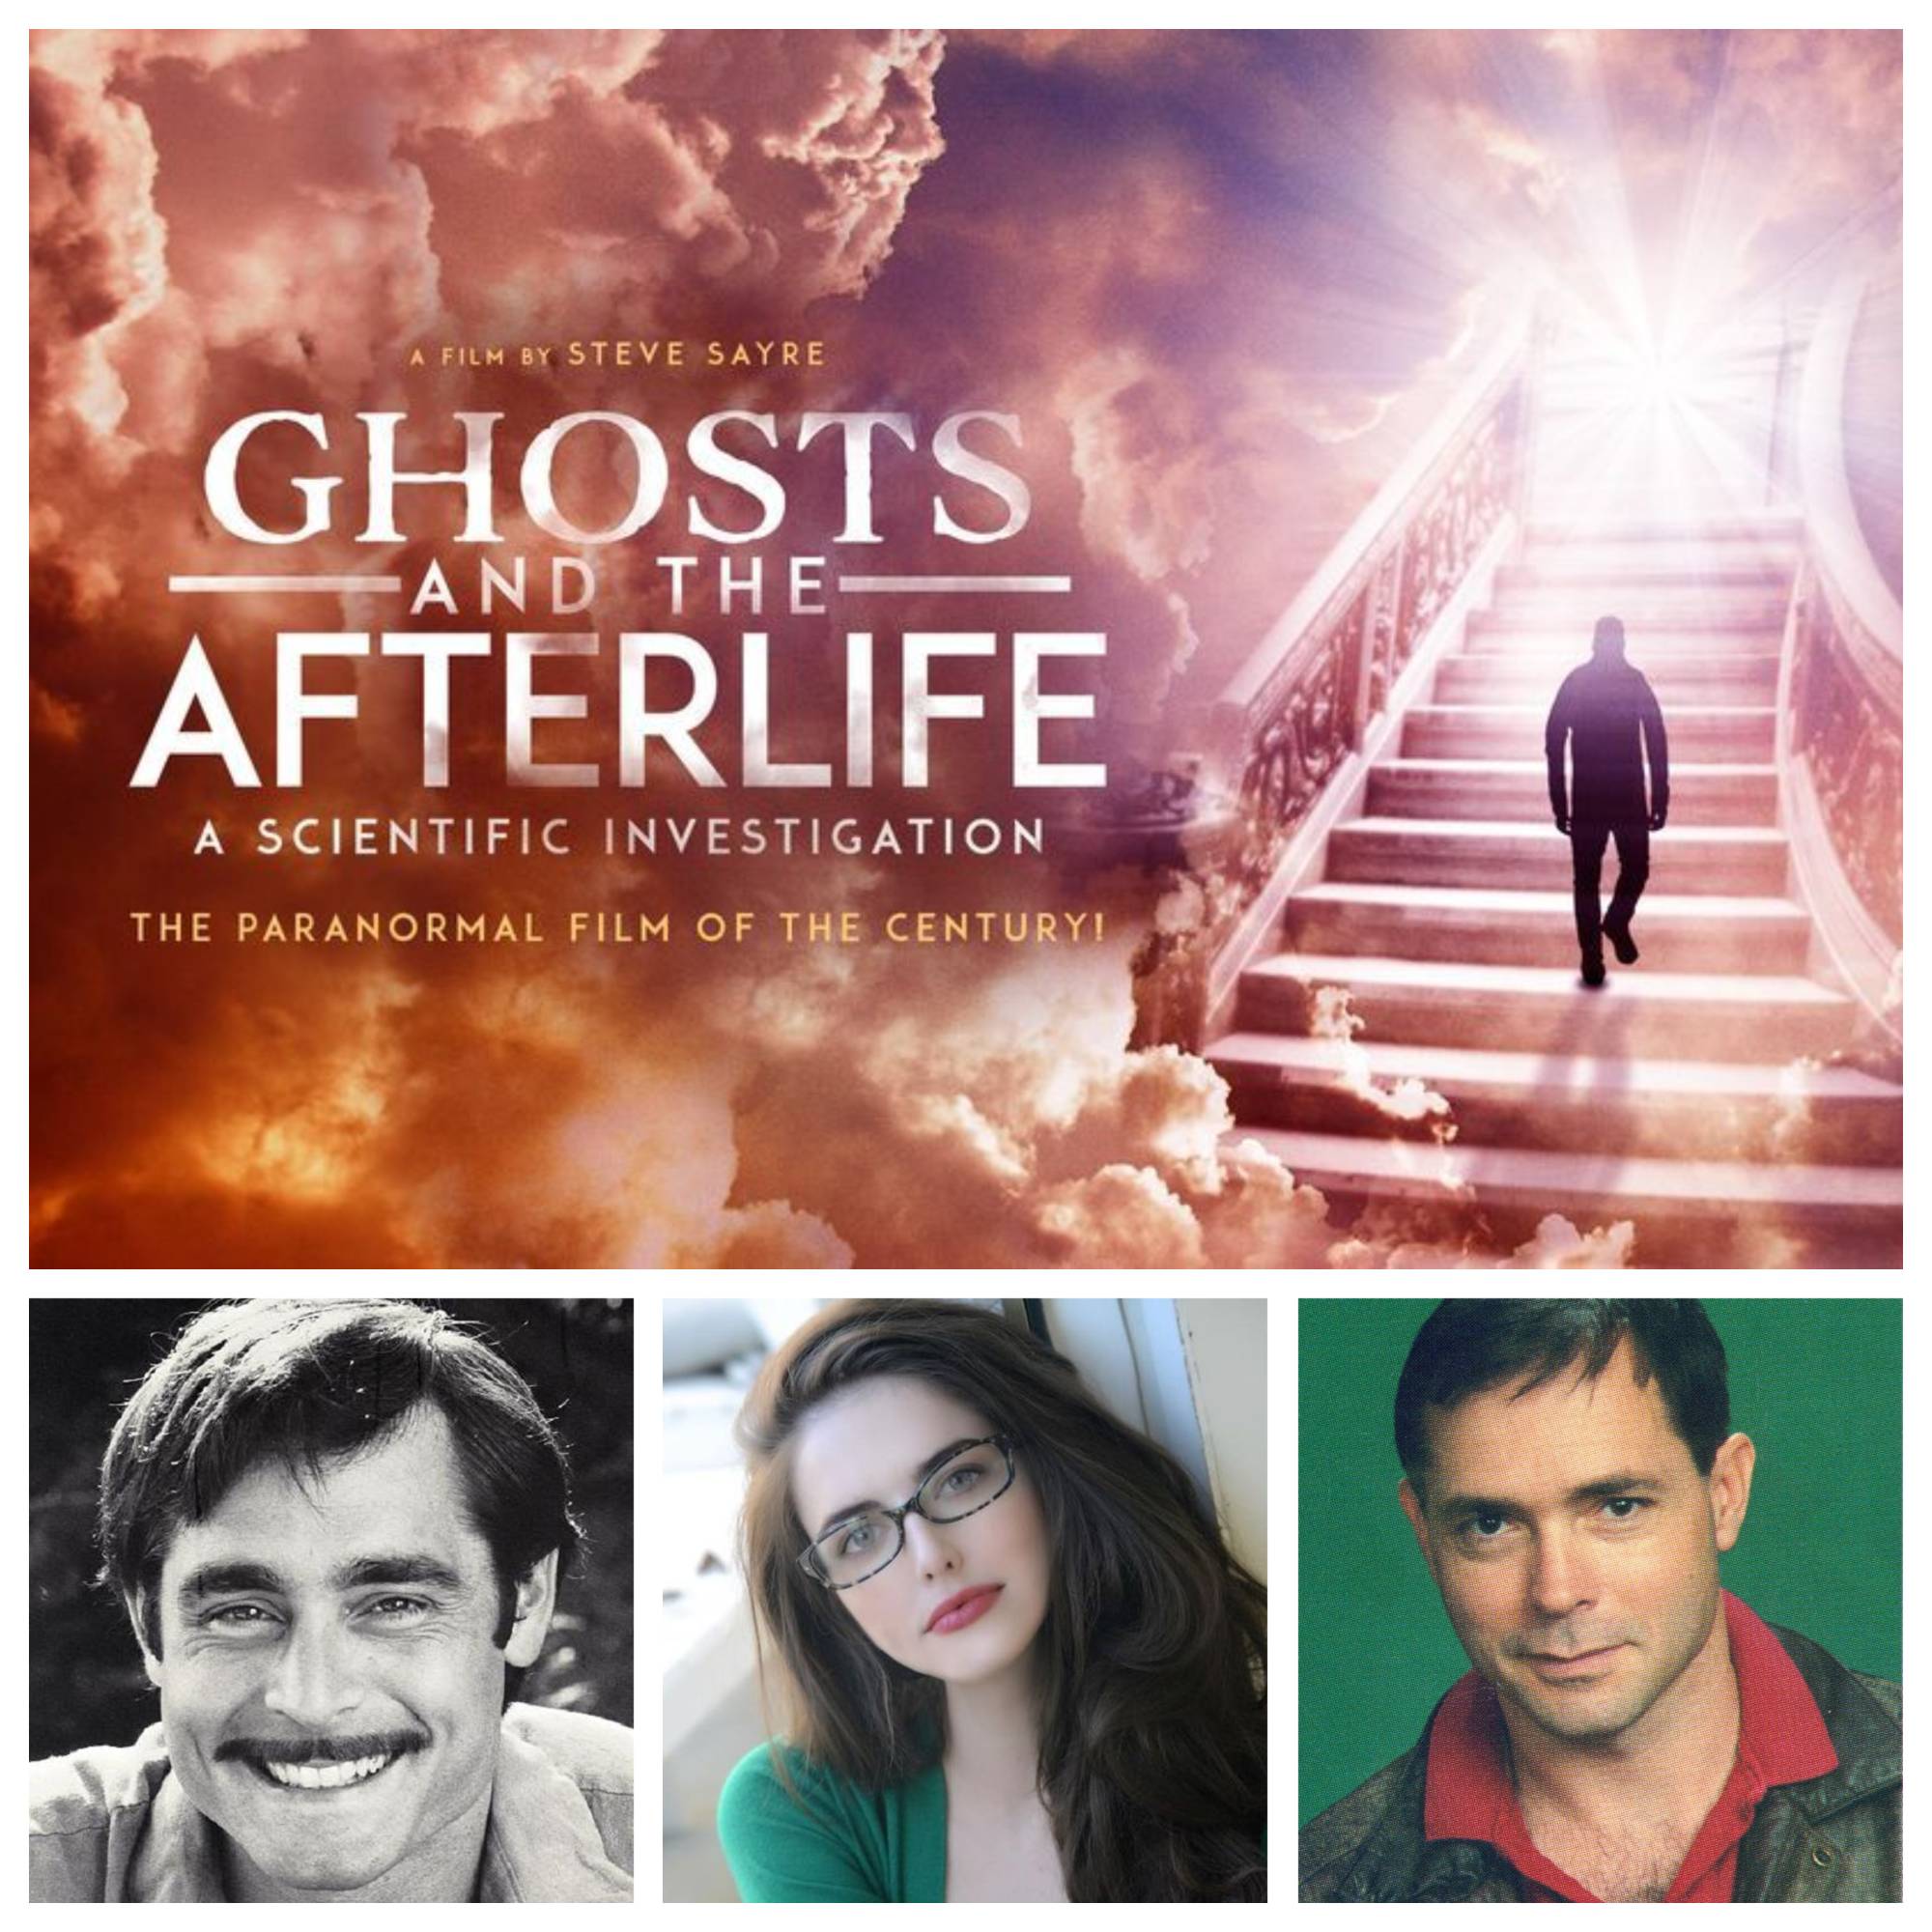 Movie Reviews for “Ghosts and the Afterlife: A Scientific Investigation”